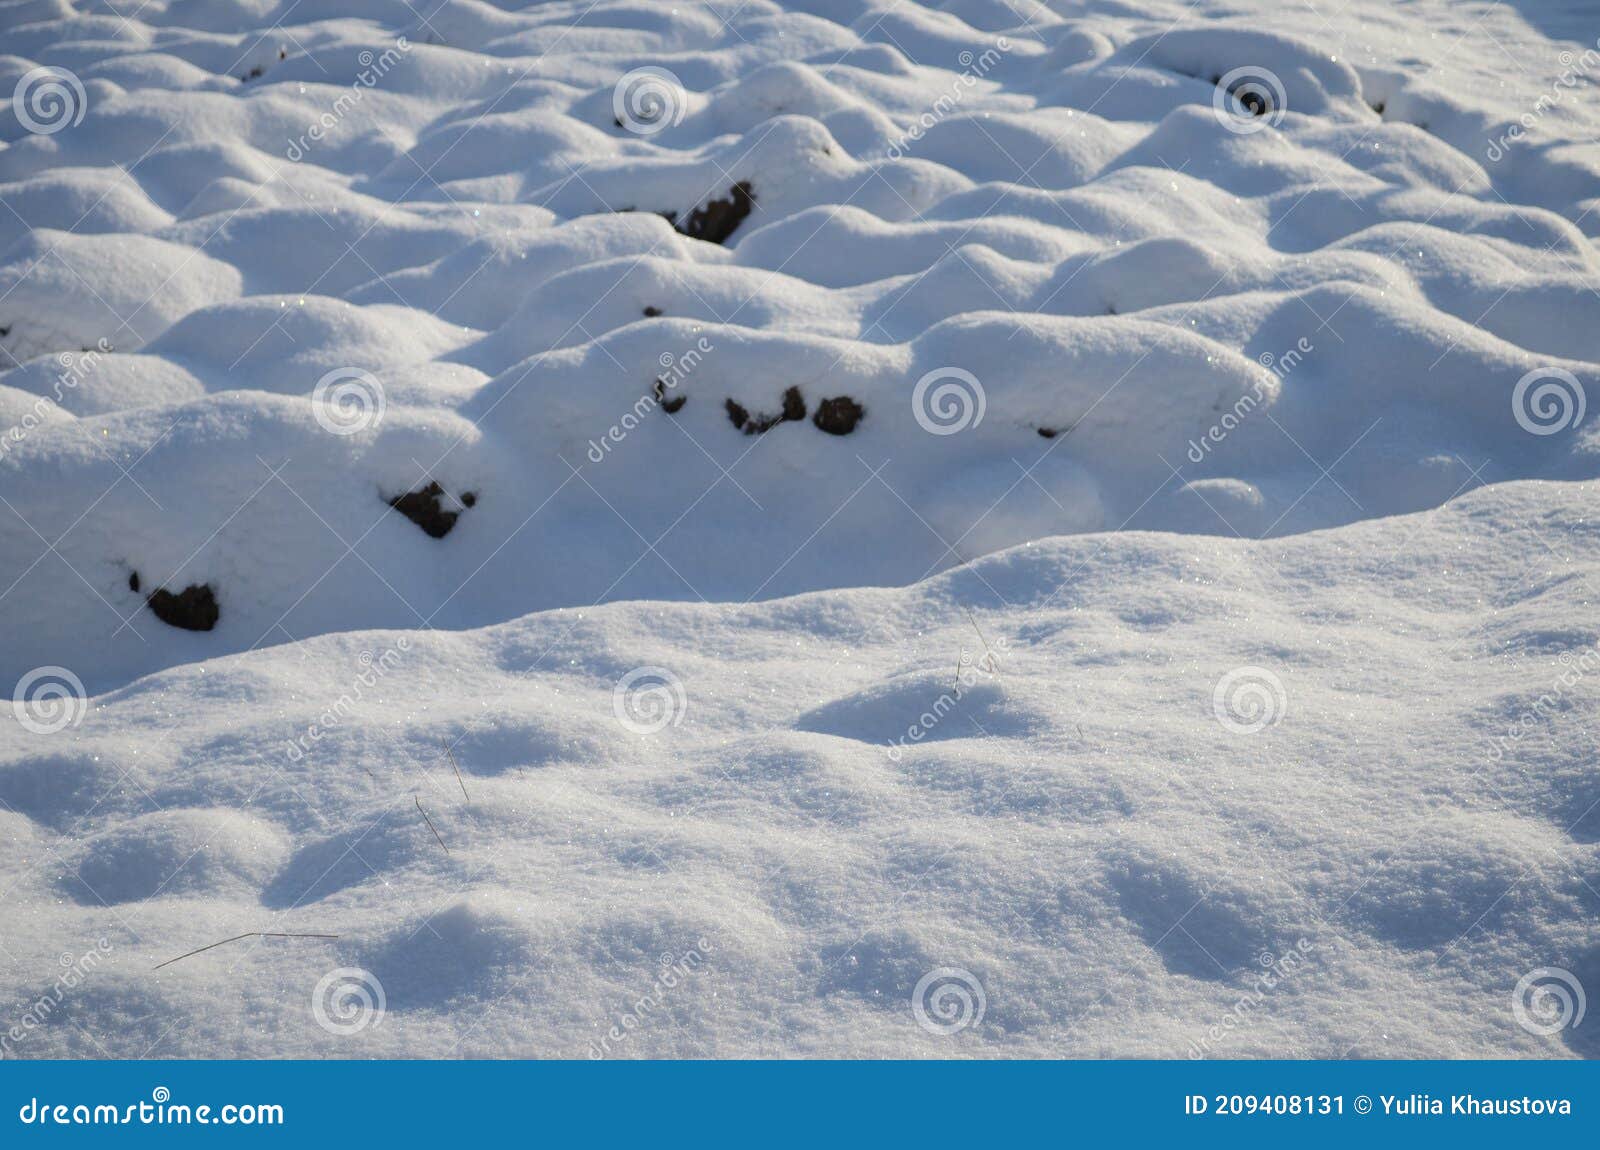 Beautiful Snow Pattern Wallpaper for Desktop, Texture of Snowfall on Rock.  Collection of Fresh Snow on Ground Stock Image - Image of field, fresh:  209408131